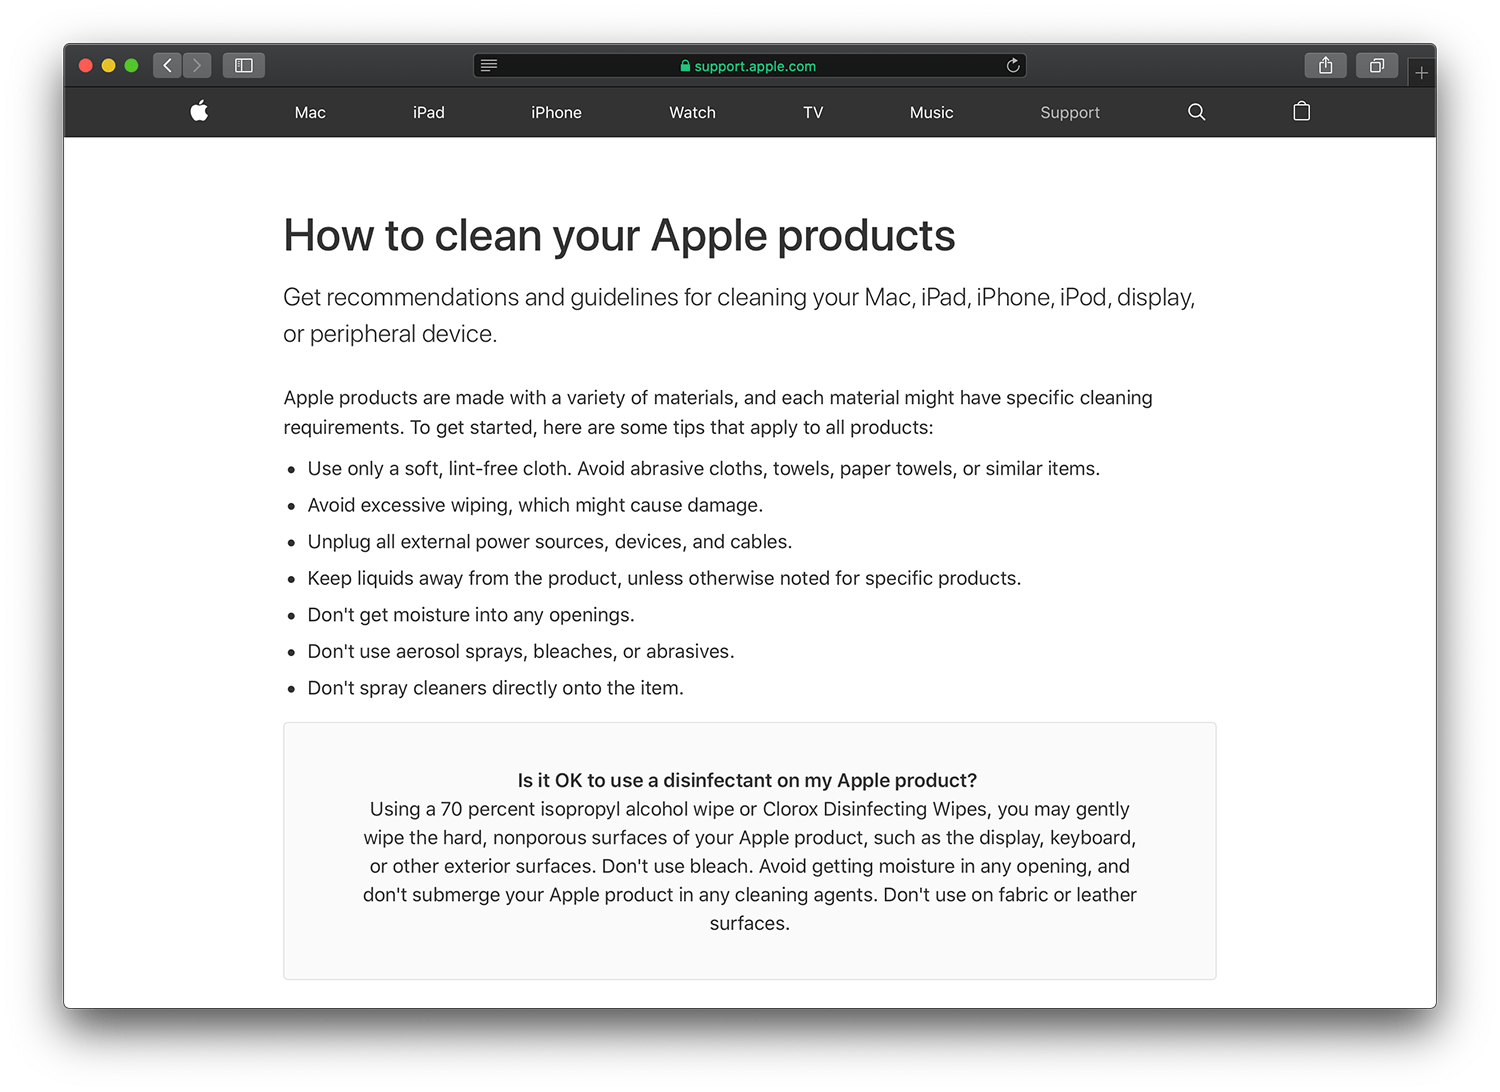 Apple Support – How to clean your Apple products (Published Date: March 09, 2020)